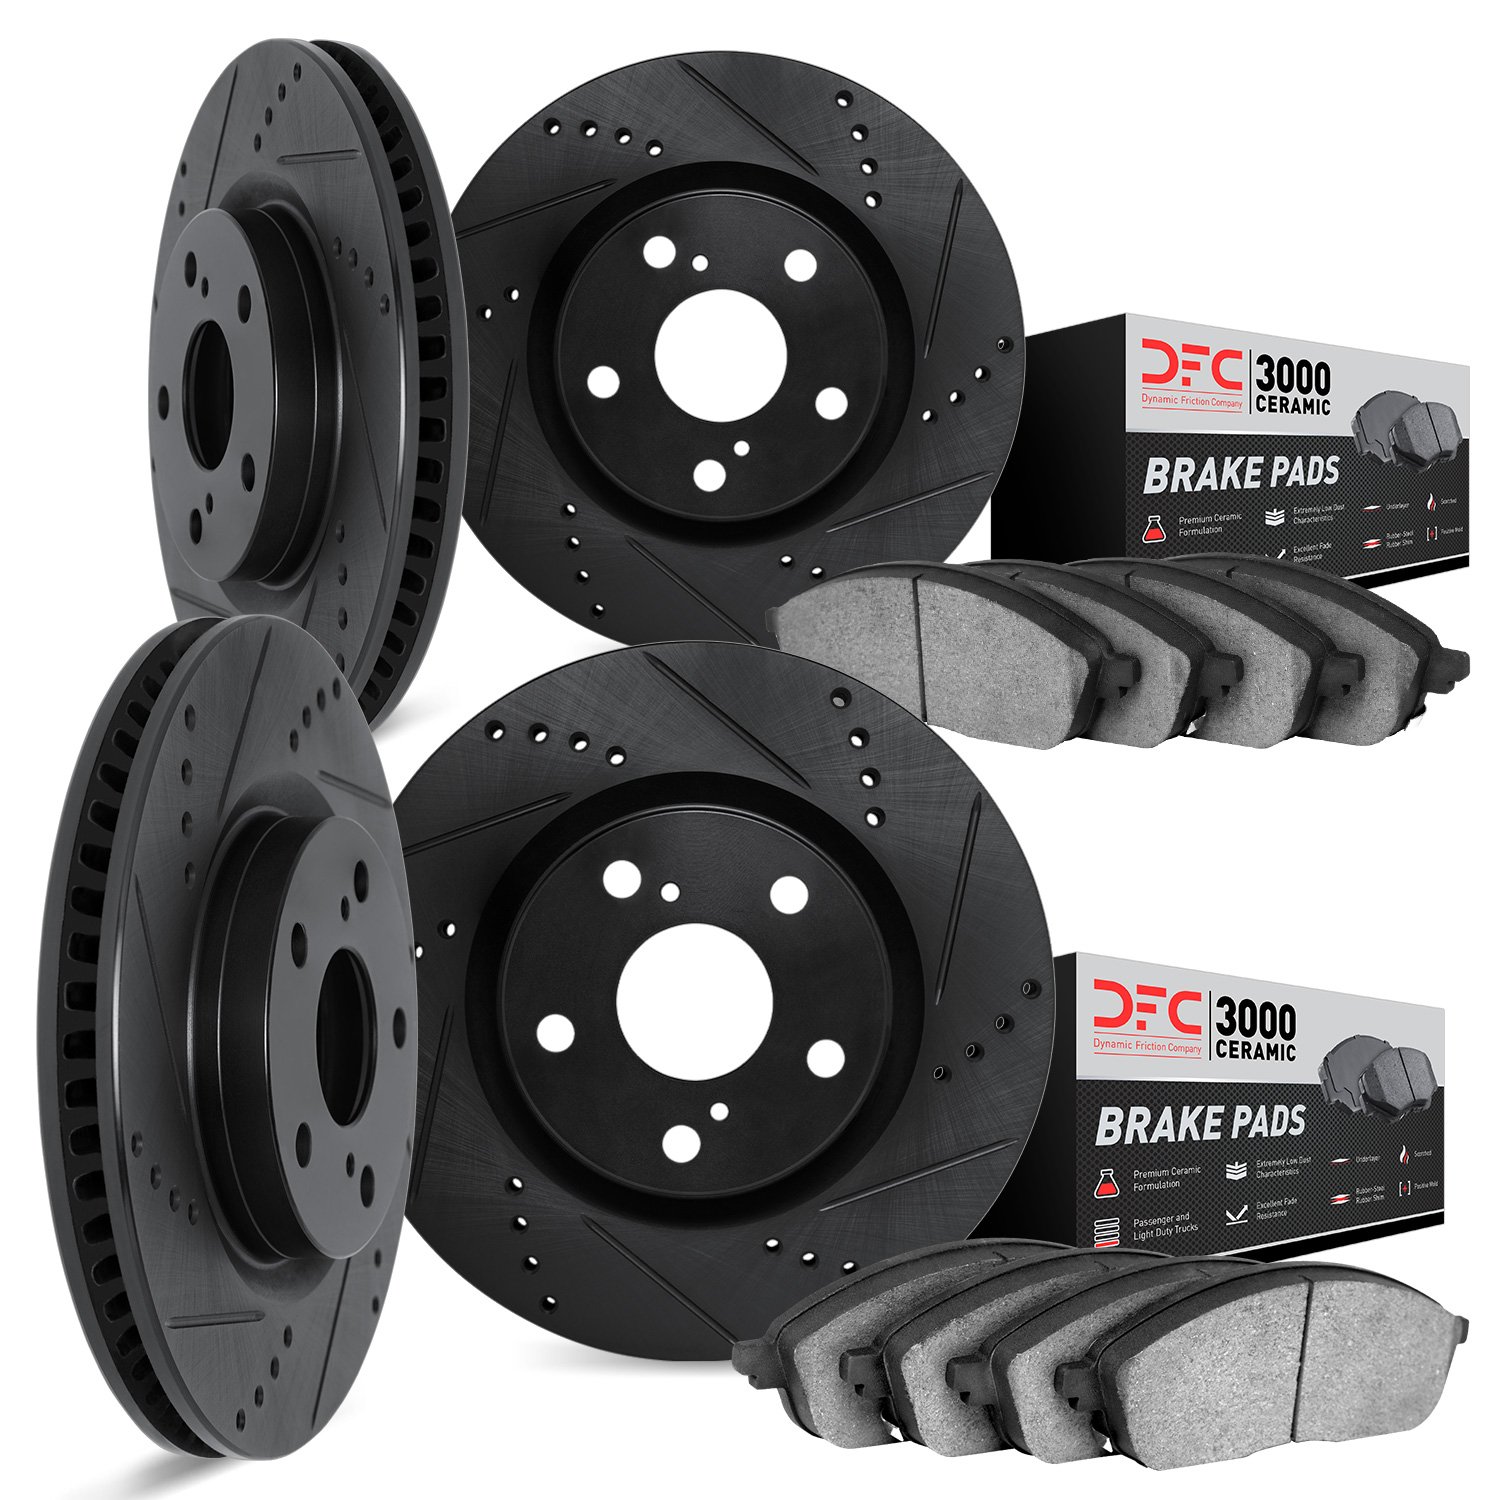 8304-72047 Drilled/Slotted Brake Rotors with 3000-Series Ceramic Brake Pads Kit [Black], 2008-2015 Mitsubishi, Position: Front a